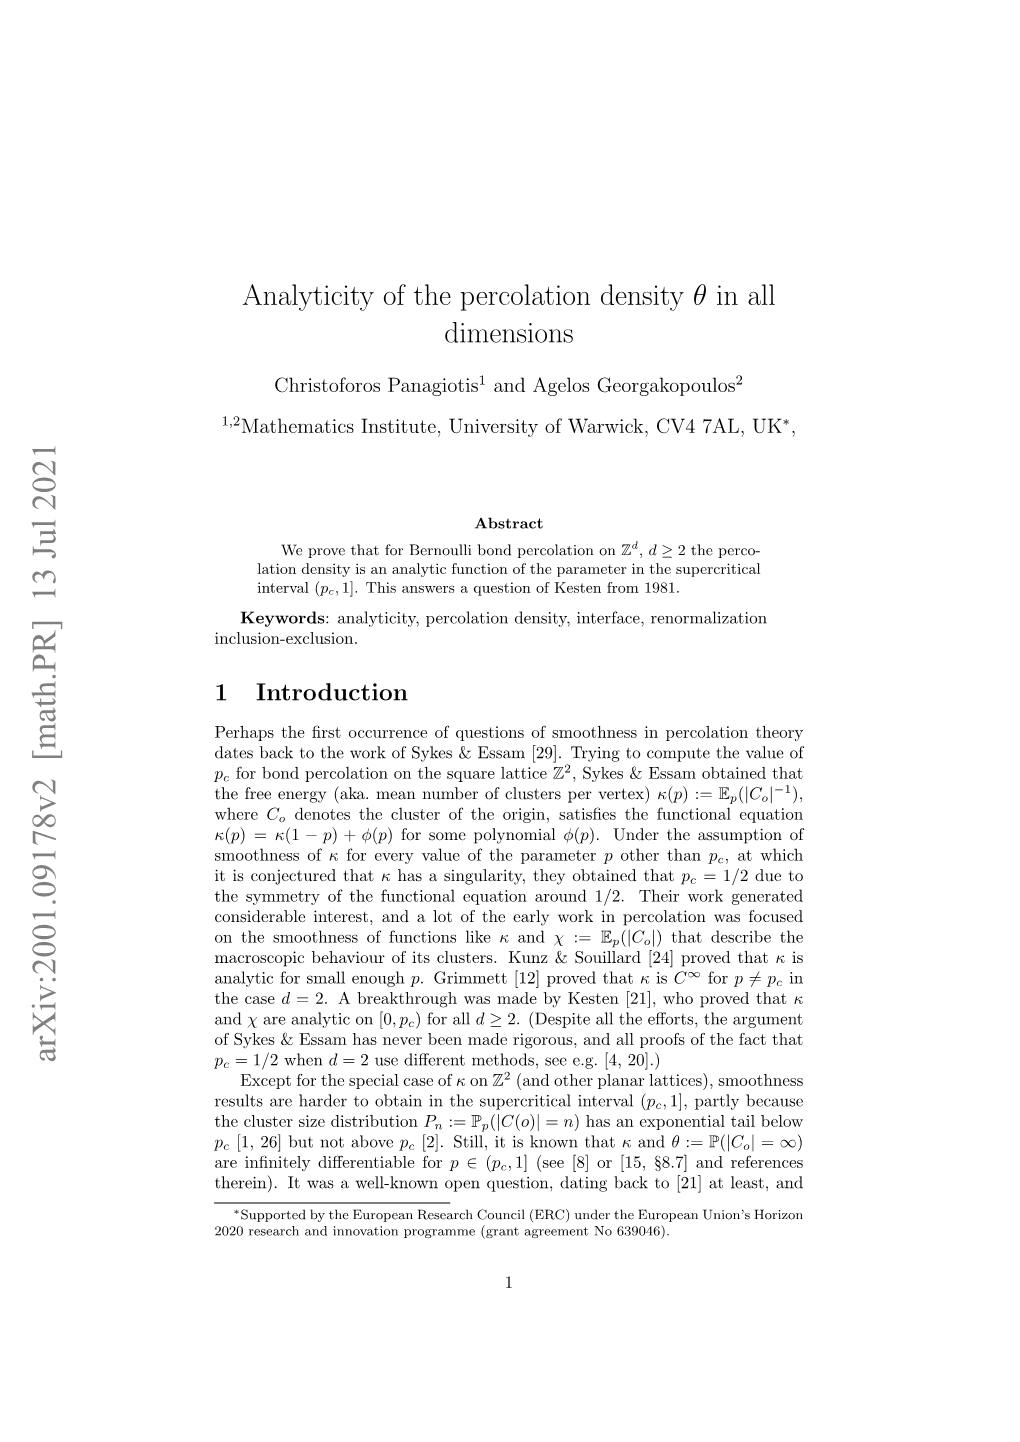 Analyticity of the Percolation Density Θ in All Dimensions